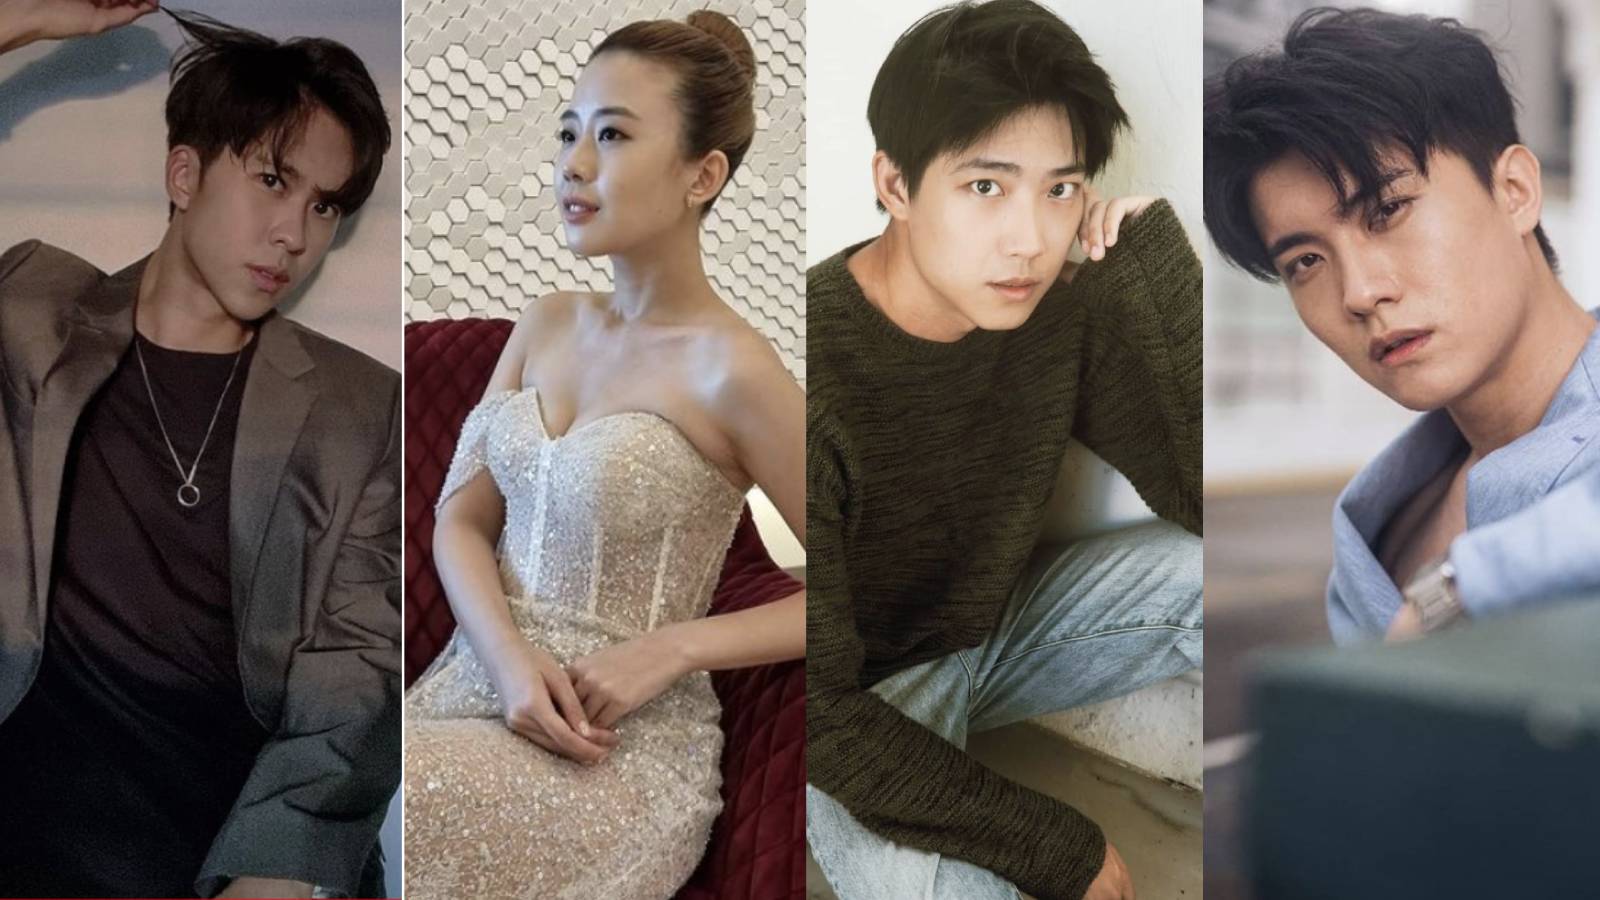 Crabs, Detectives And Generals? The Fan Clubs Of These Newbie Stars Have Really Creative Names